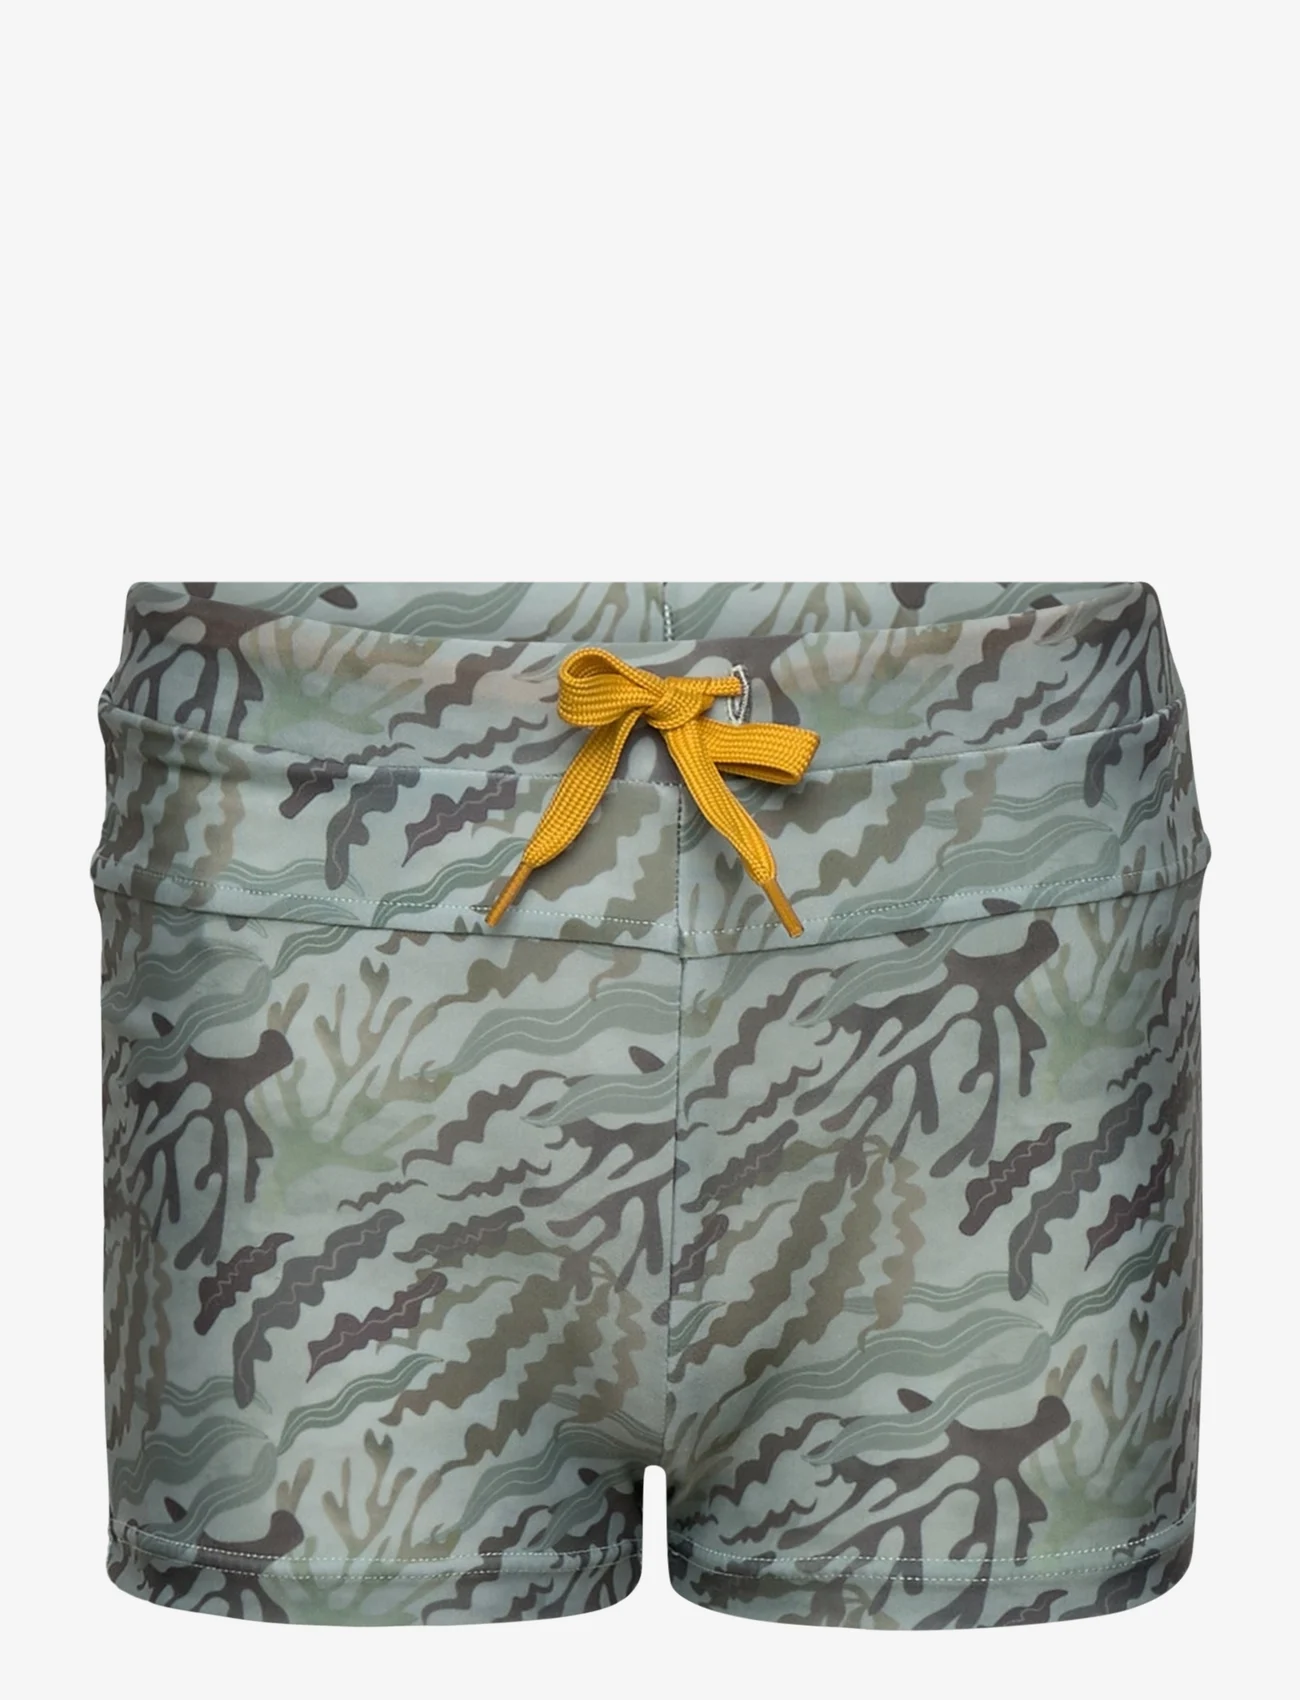 Mini A Ture - Gerryan printed swim shorts - sommerschnäppchen - print sea weed camo - 0